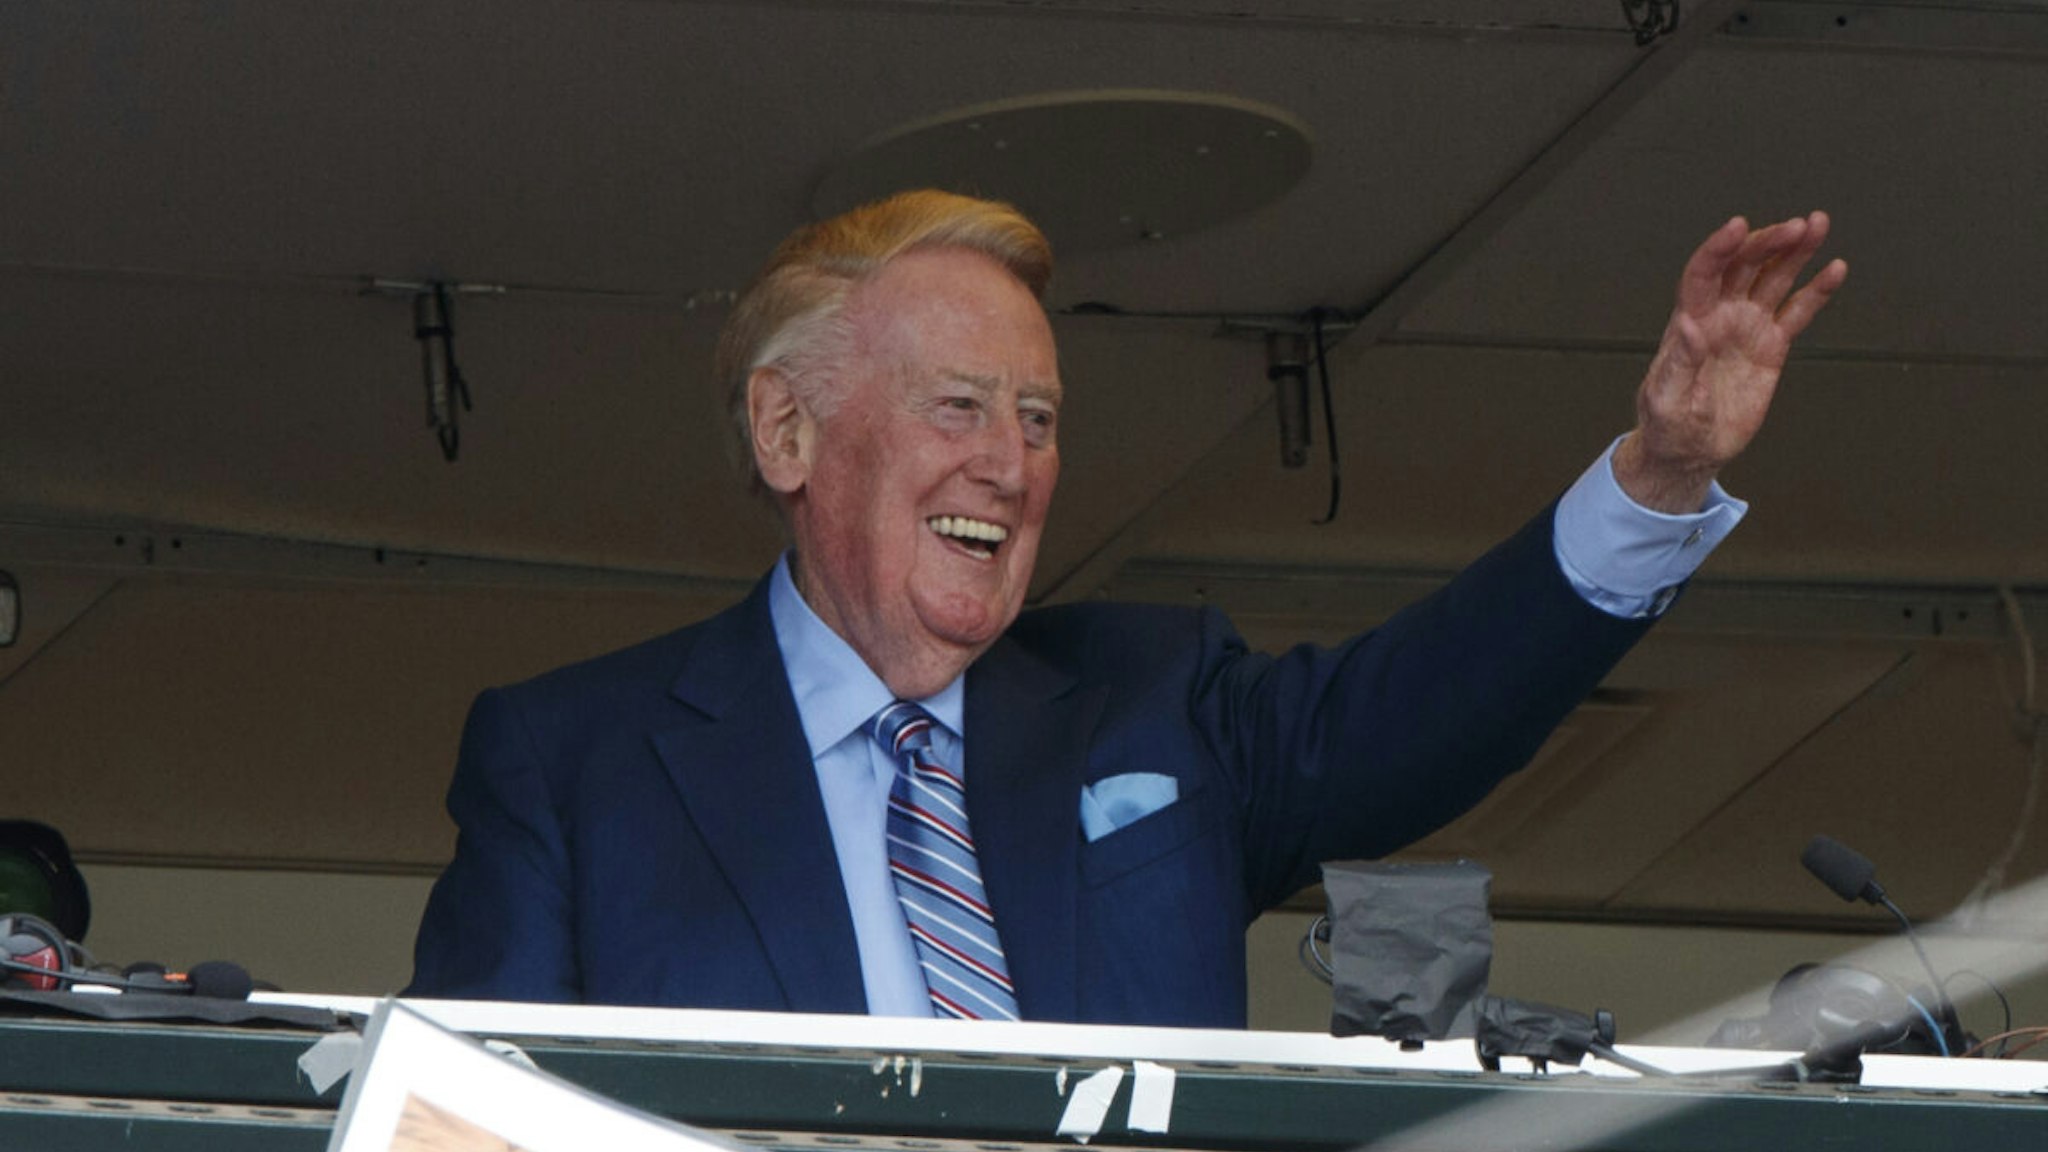 Broadcaster Vin Scully acknowledges fans before the game between the San Francisco Giants and the Los Angeles Dodgers at AT&T Park on October 2, 2016 in San Francisco, California.